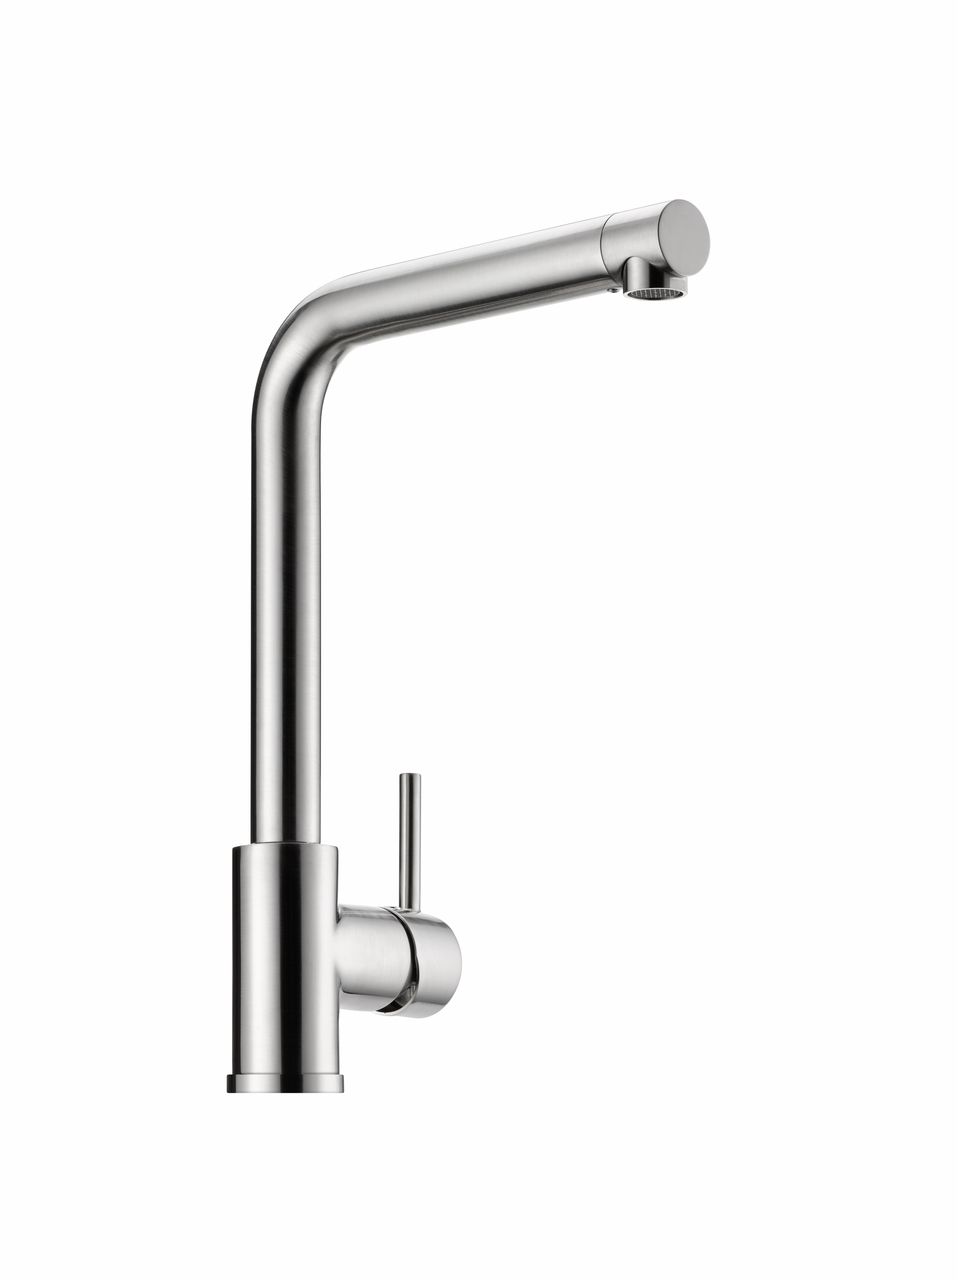 LINEA Arco 1, stainless steel finish, high pressure